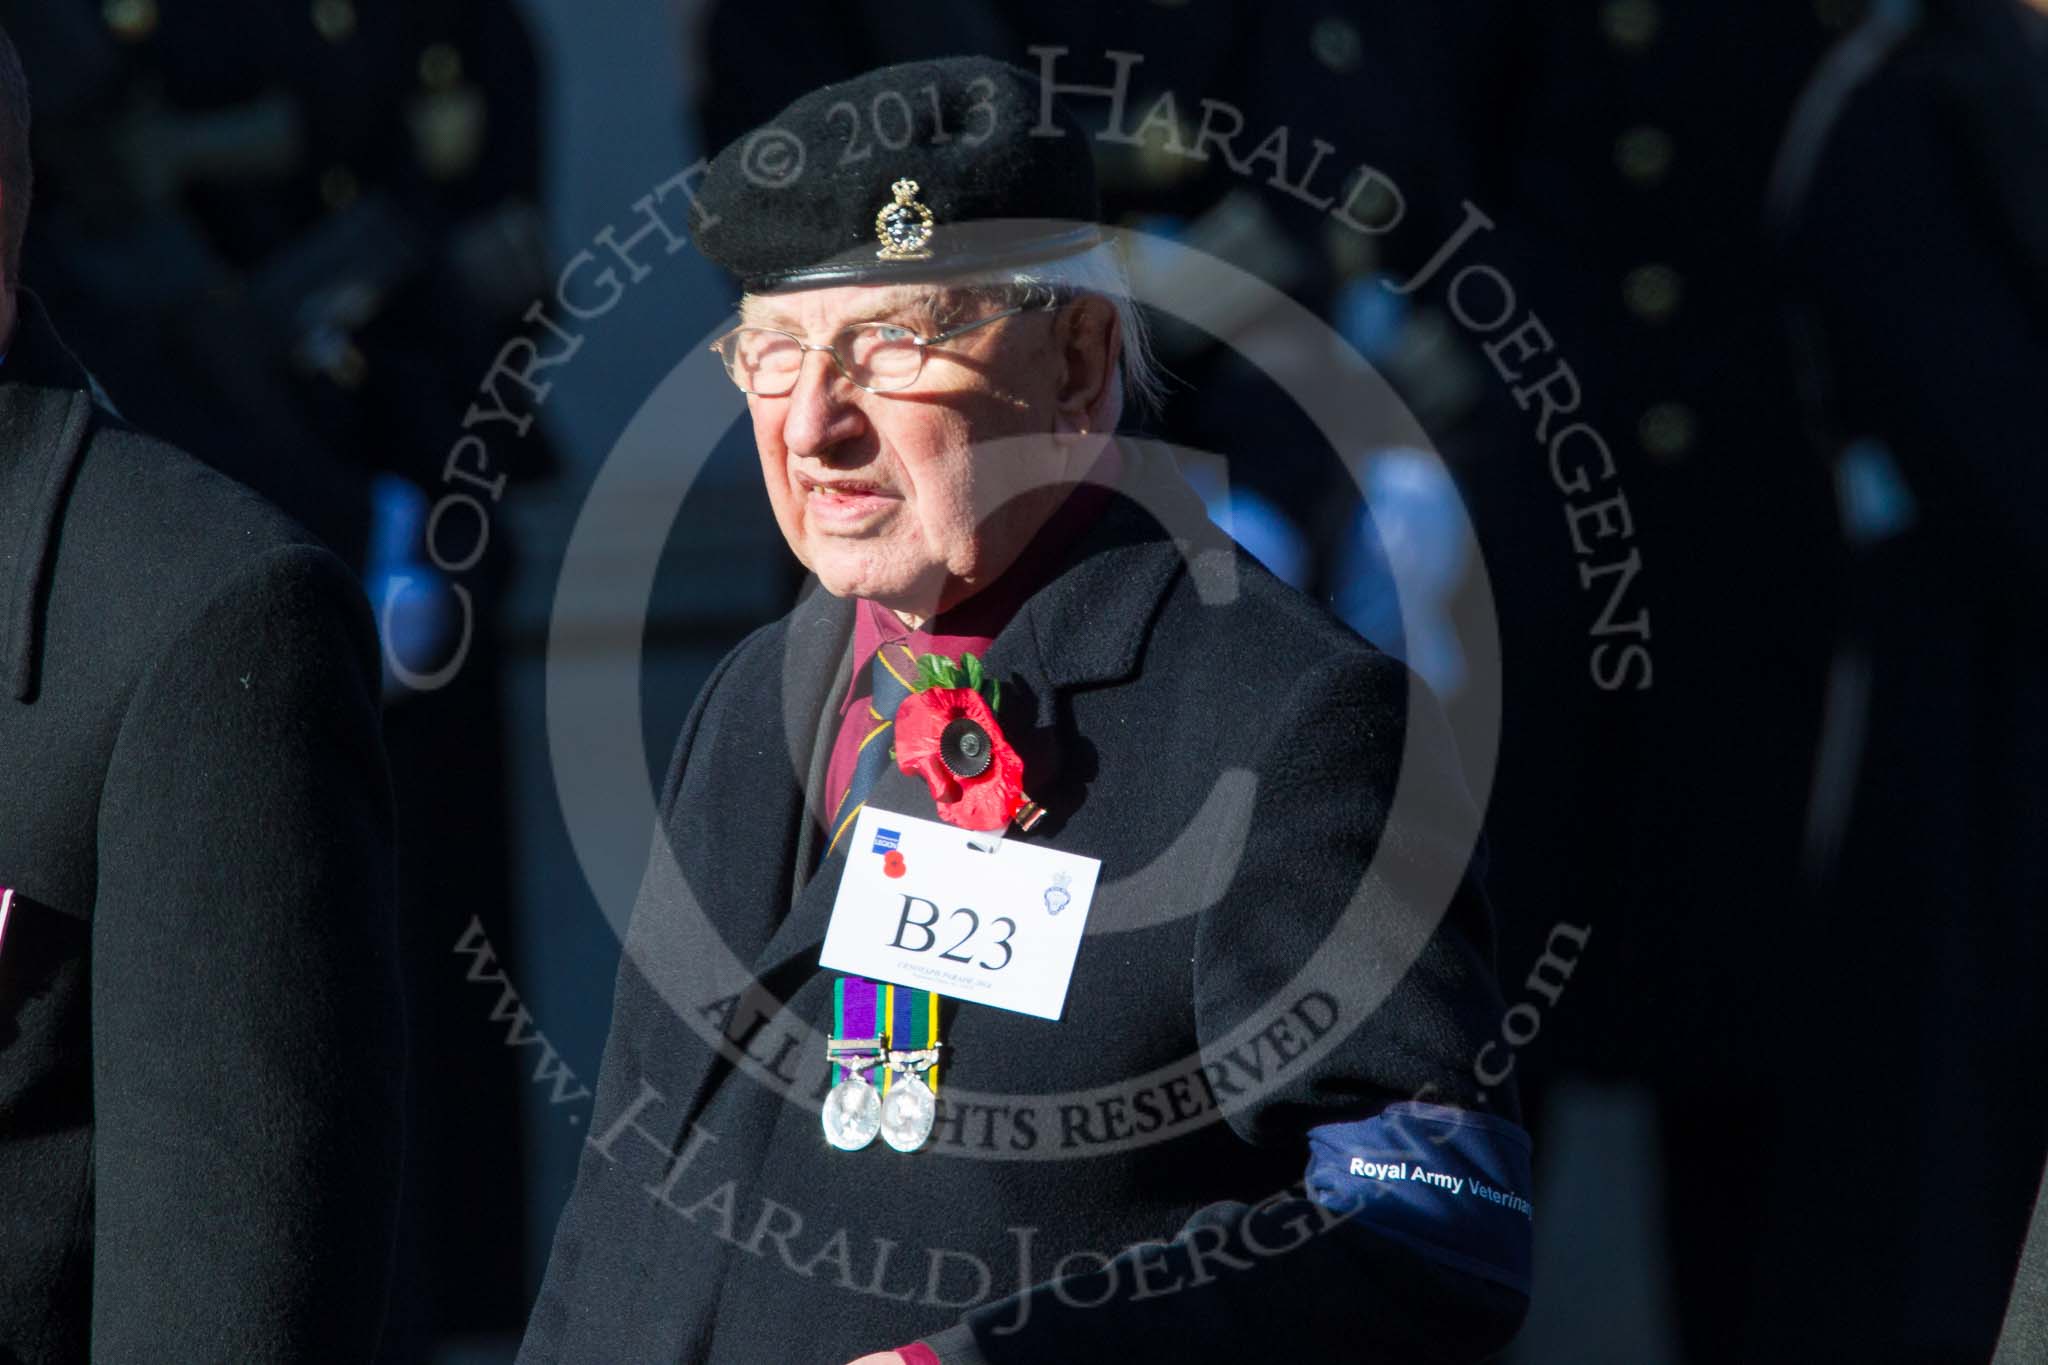 Remembrance Sunday at the Cenotaph in London 2014: Group B23 - Royal Army Veterinary Corps & Royal Army Dental Corps.
Press stand opposite the Foreign Office building, Whitehall, London SW1,
London,
Greater London,
United Kingdom,
on 09 November 2014 at 12:11, image #1773